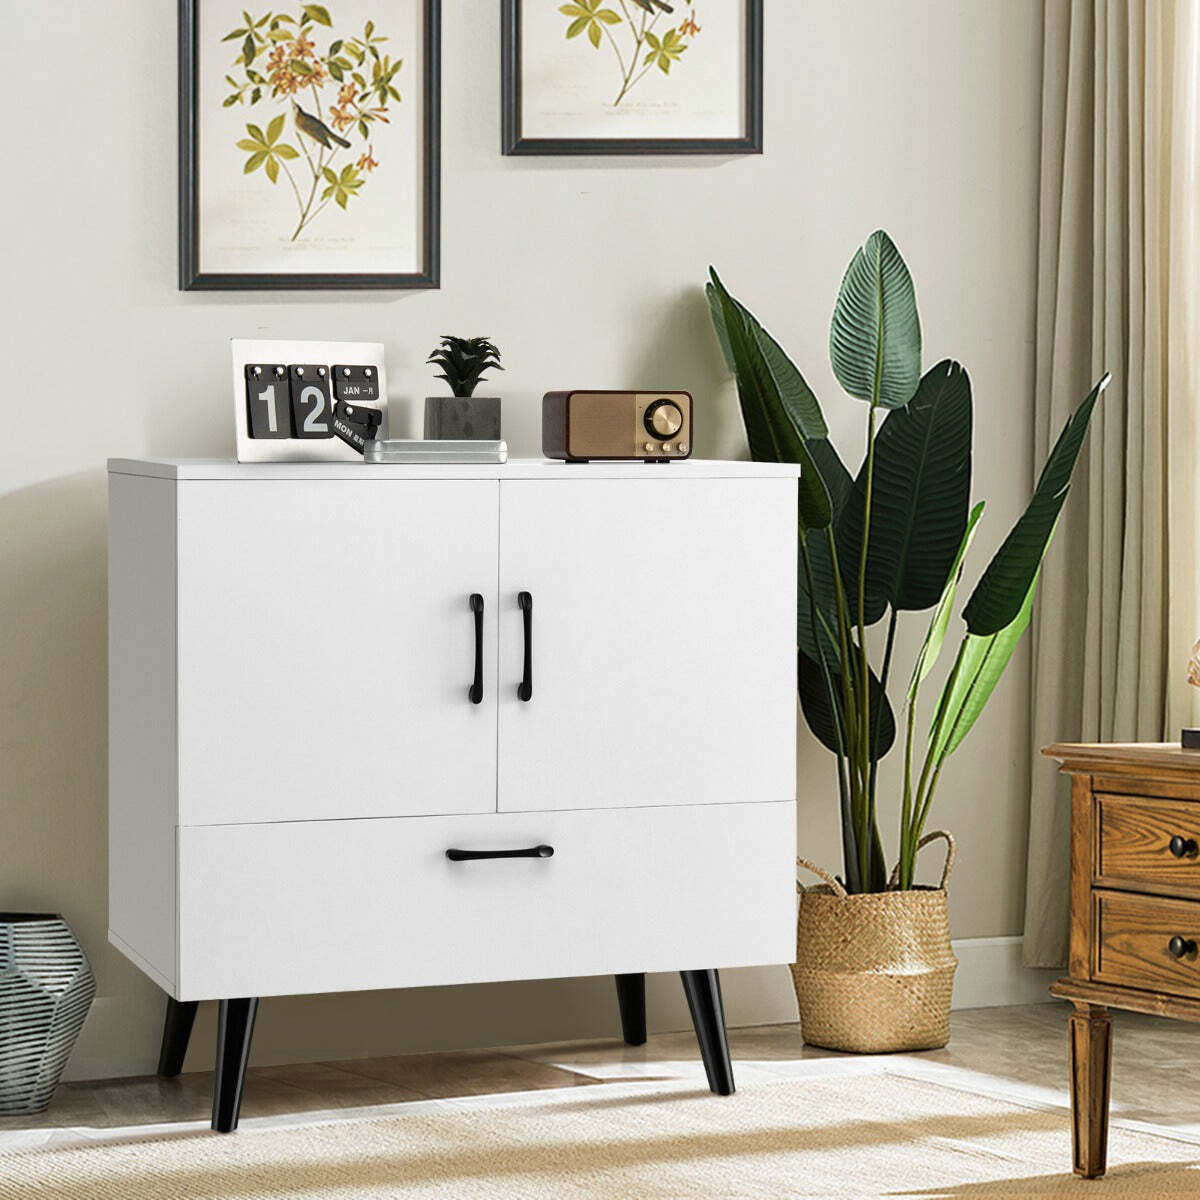 NNECW Mid-century Modern Storage Cabinet with 2 Doors & 1 Pull-out Drawer-Whi